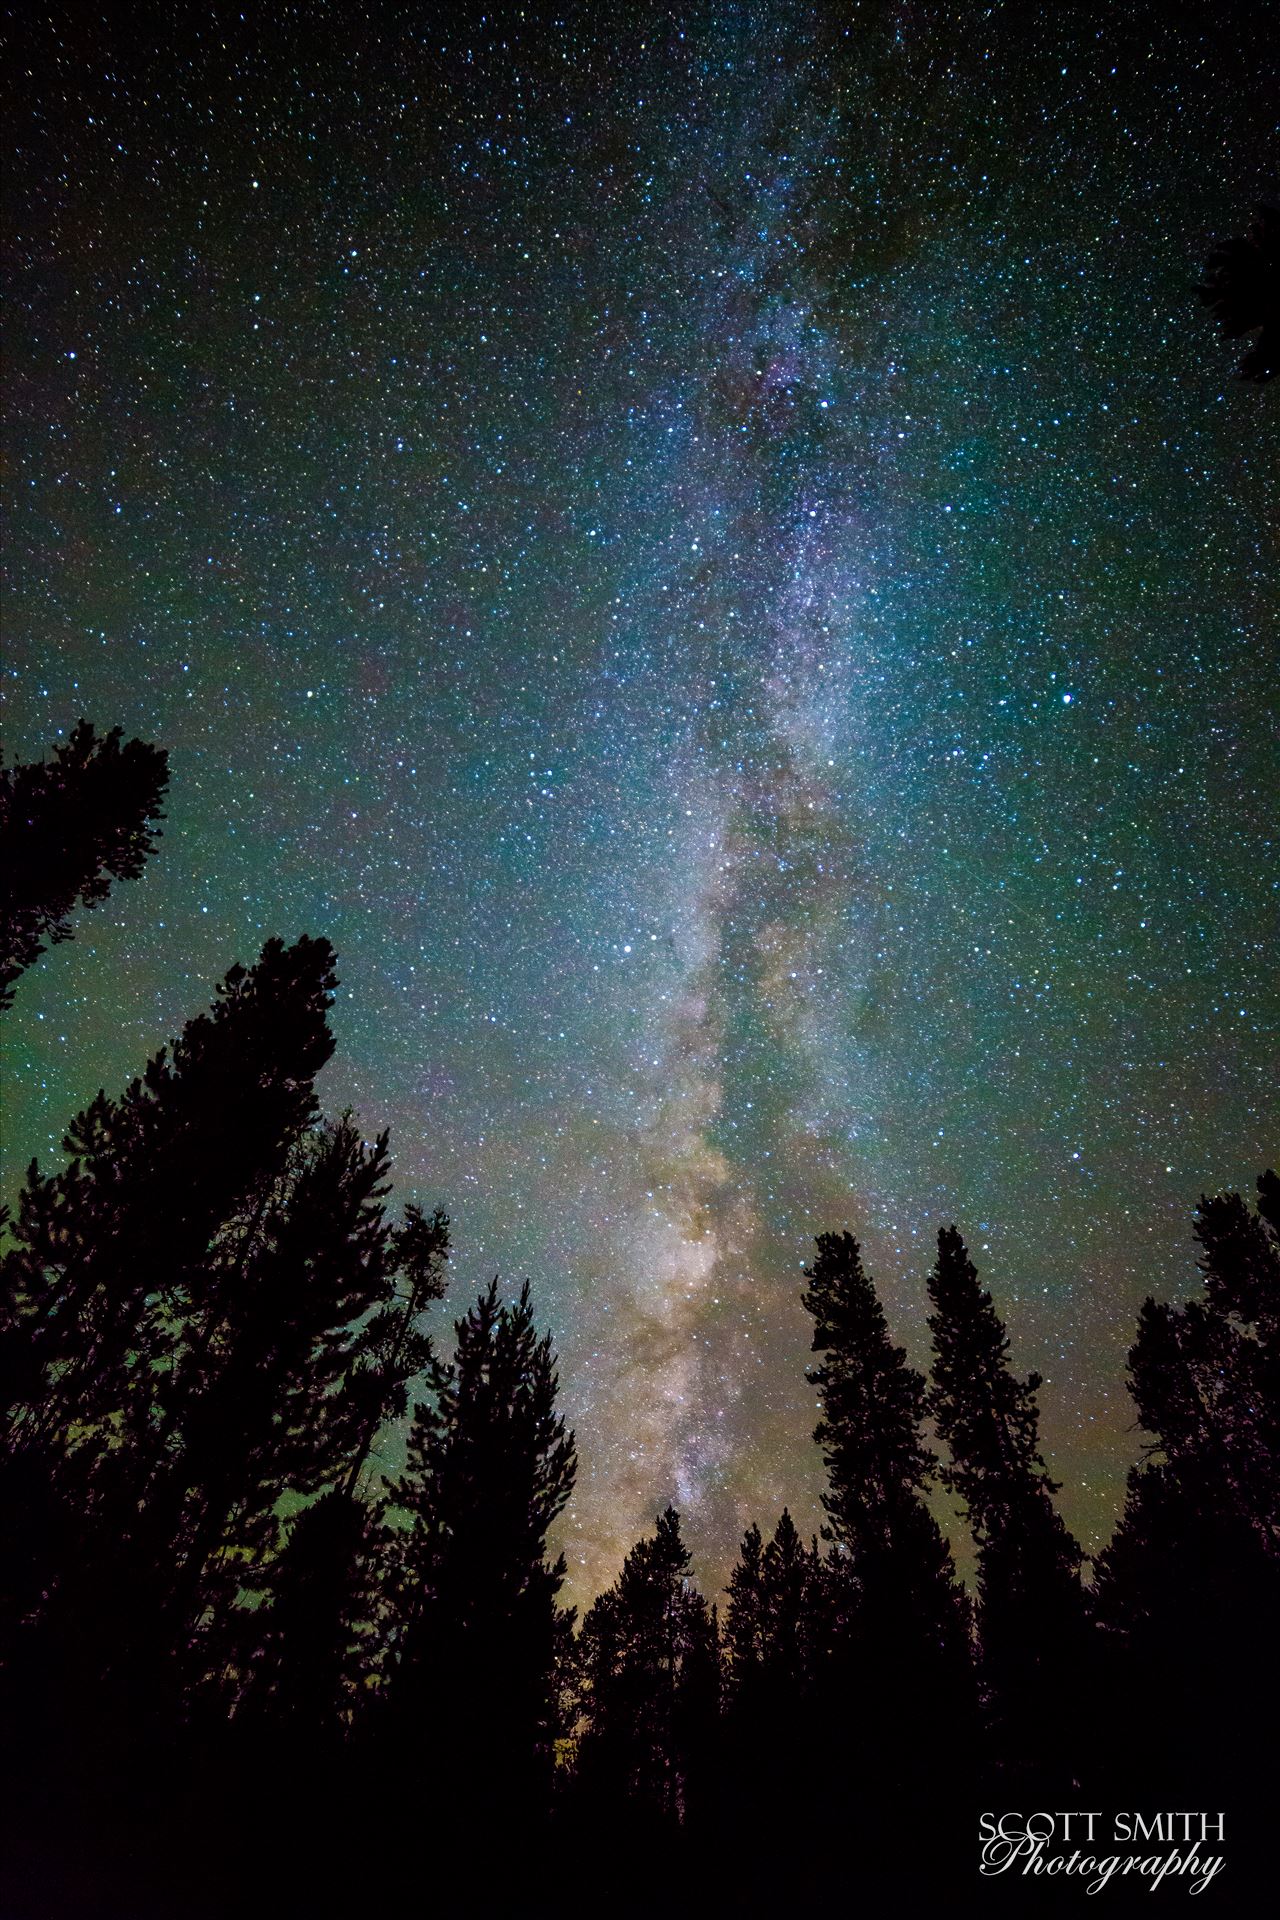 Leadville Starry Sky - Another beautiful view of the milky way from our campsite at Turquoise Lake, Leadville Colorado. by Scott Smith Photos